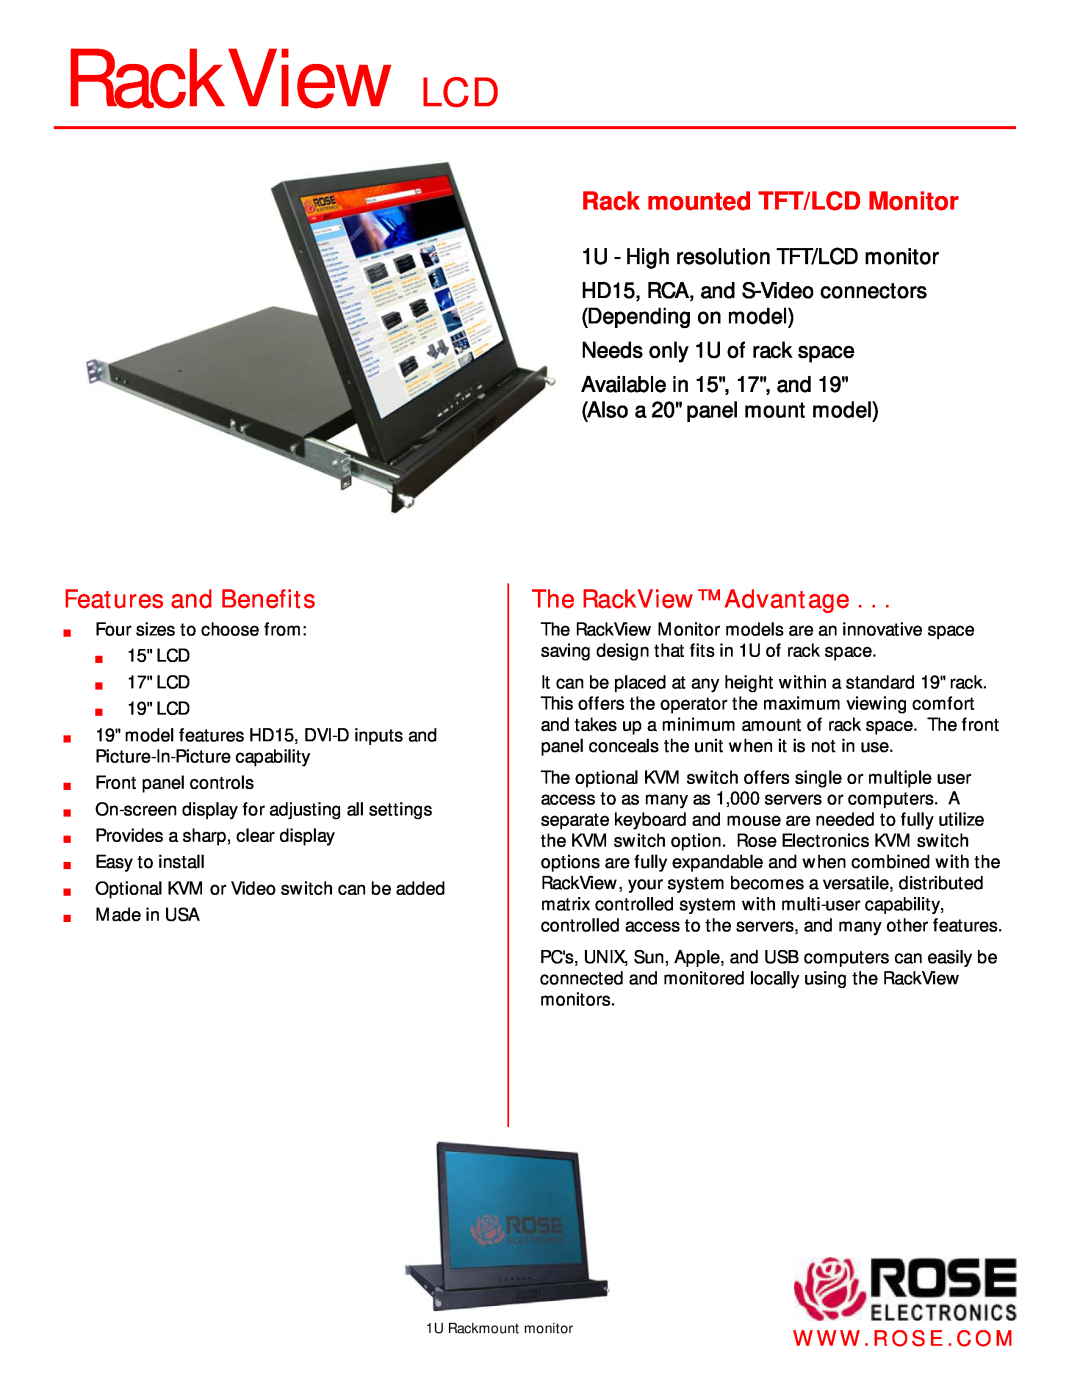 Rose electronic DVI-D manual Features and Benefits, Rack mounted TFT/LCD Monitor, The RackView Advantage, RackView LCD 